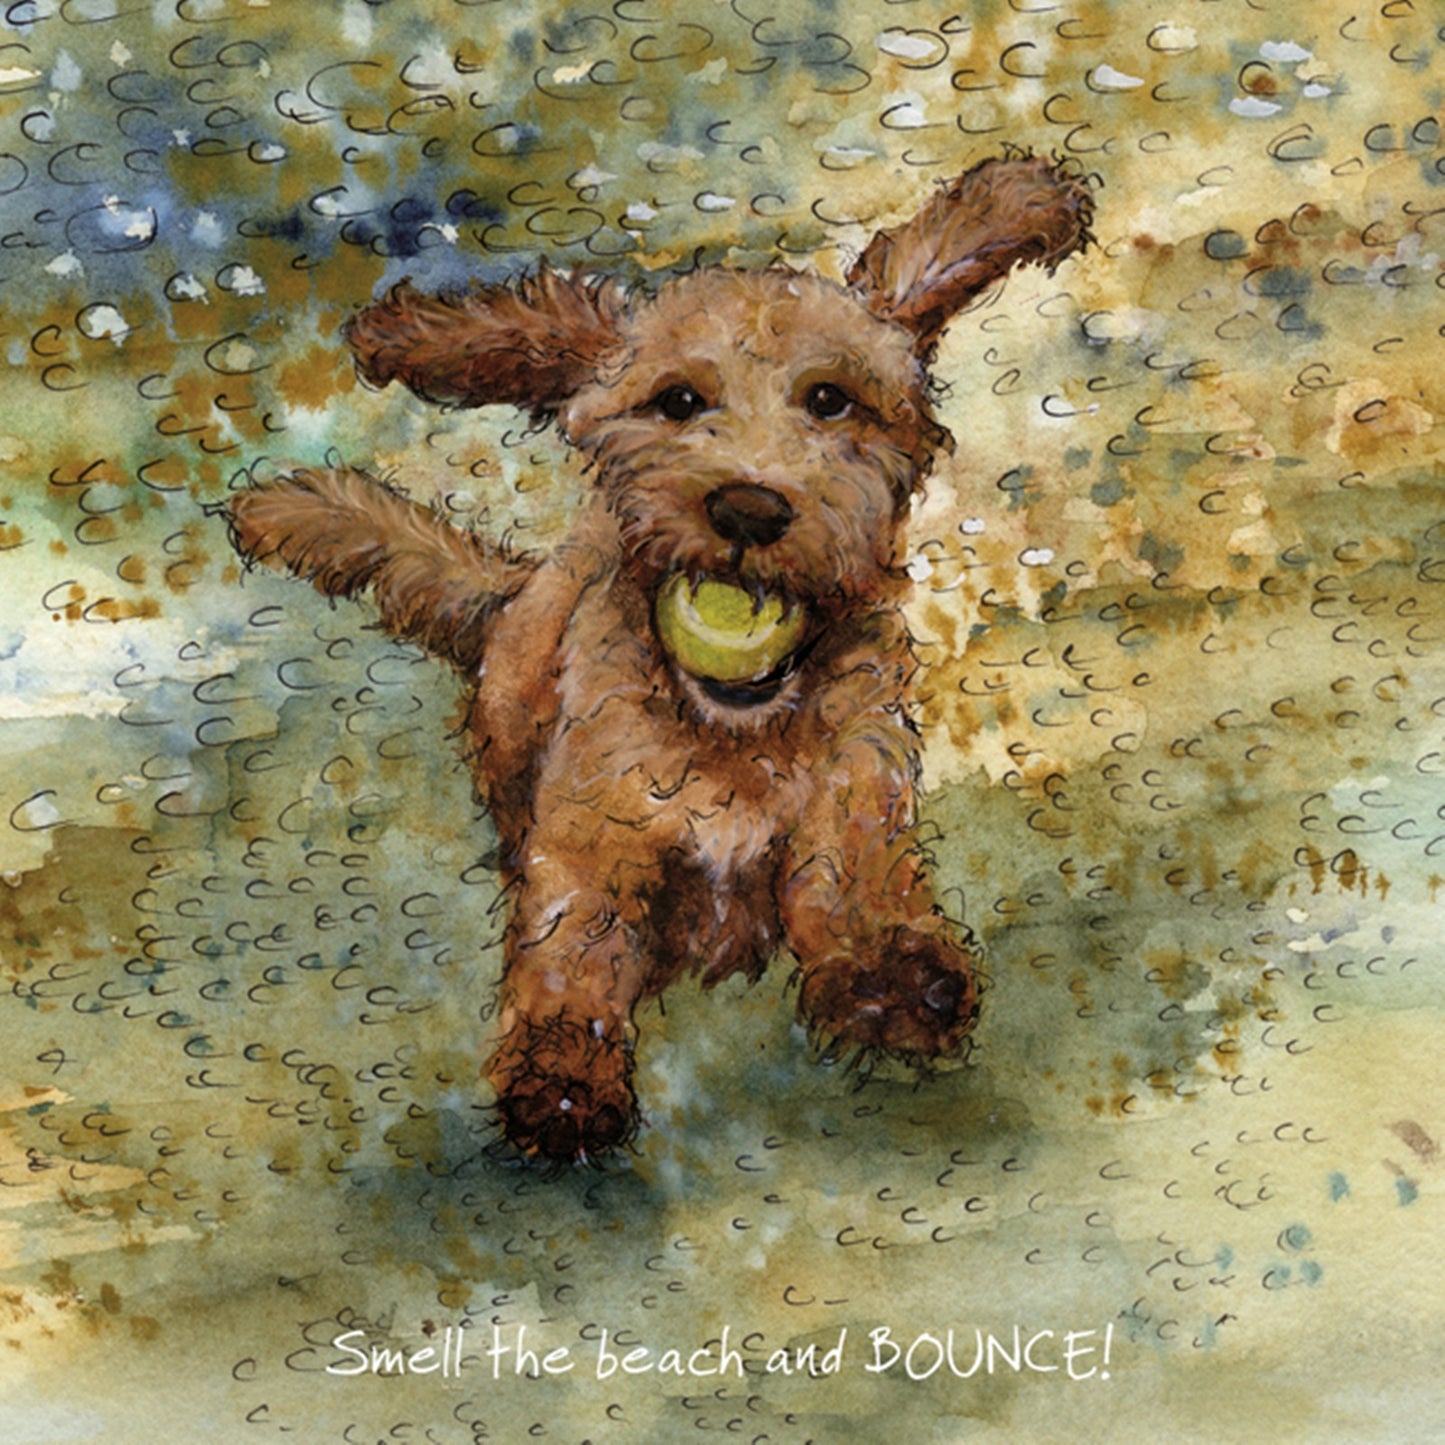 Cockapoo Greeting Card - By the little dog laughted